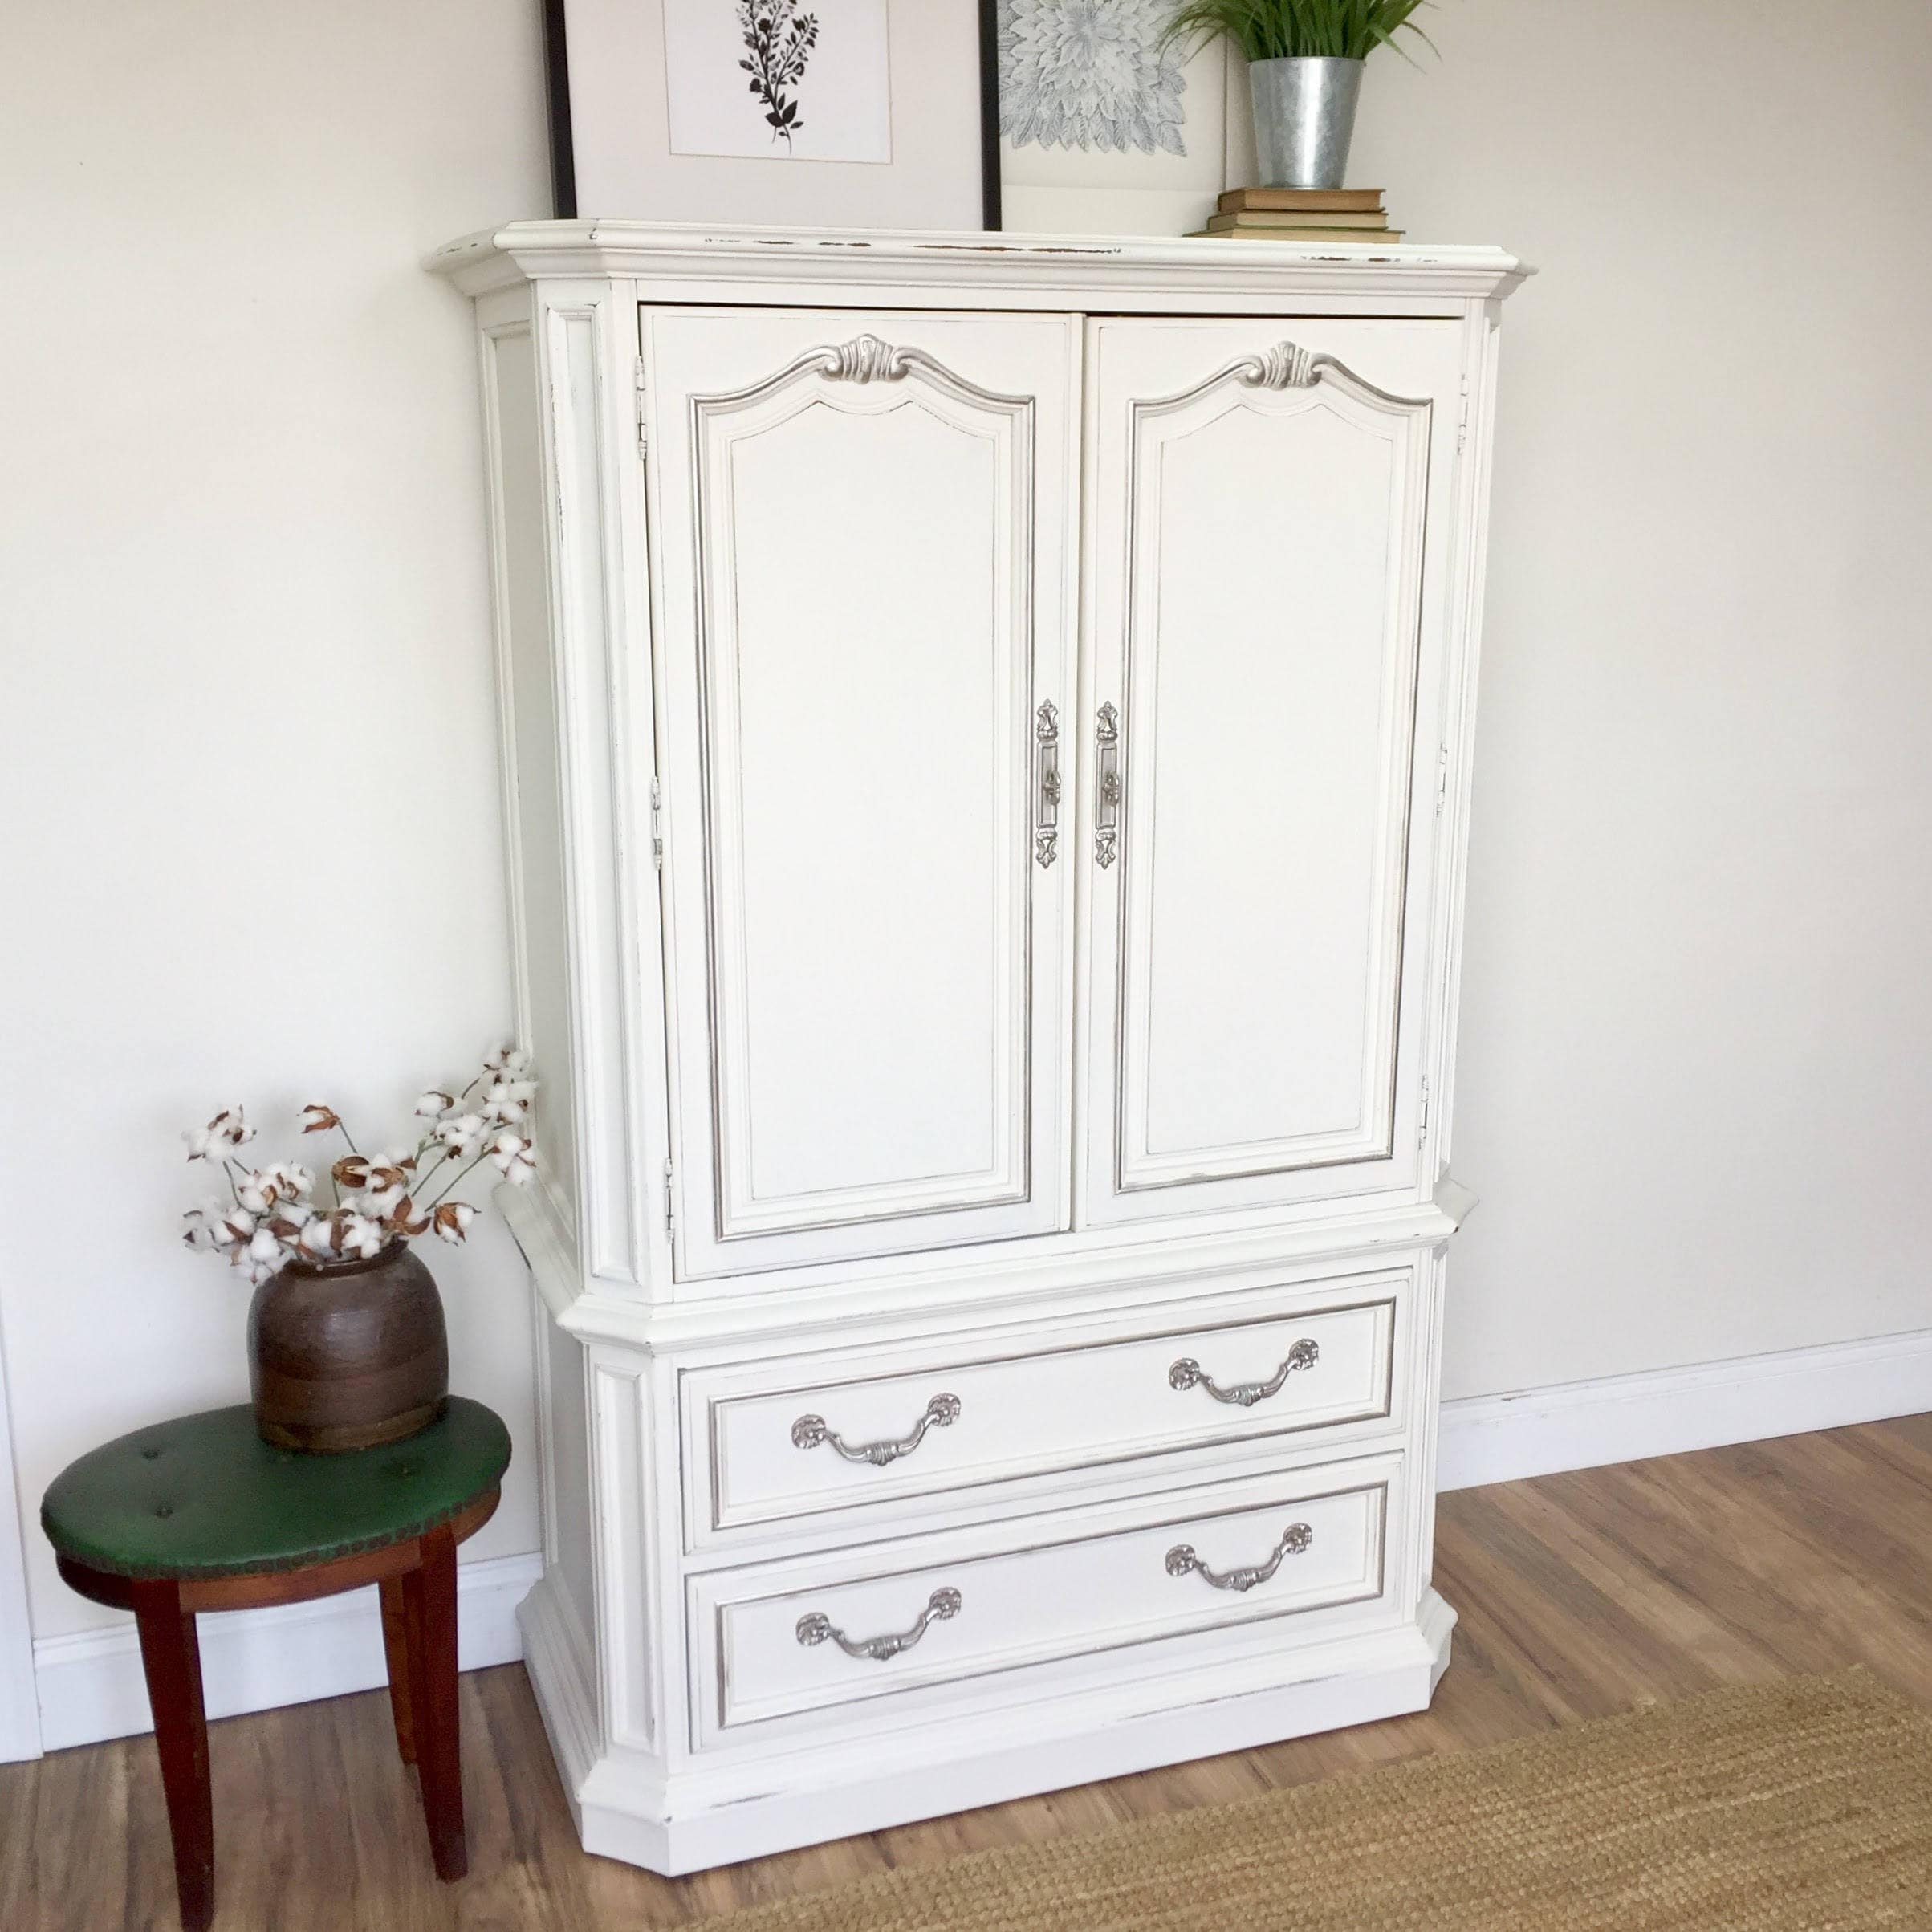 White Armoire Shabby Chic Furniture Bedroom Closet